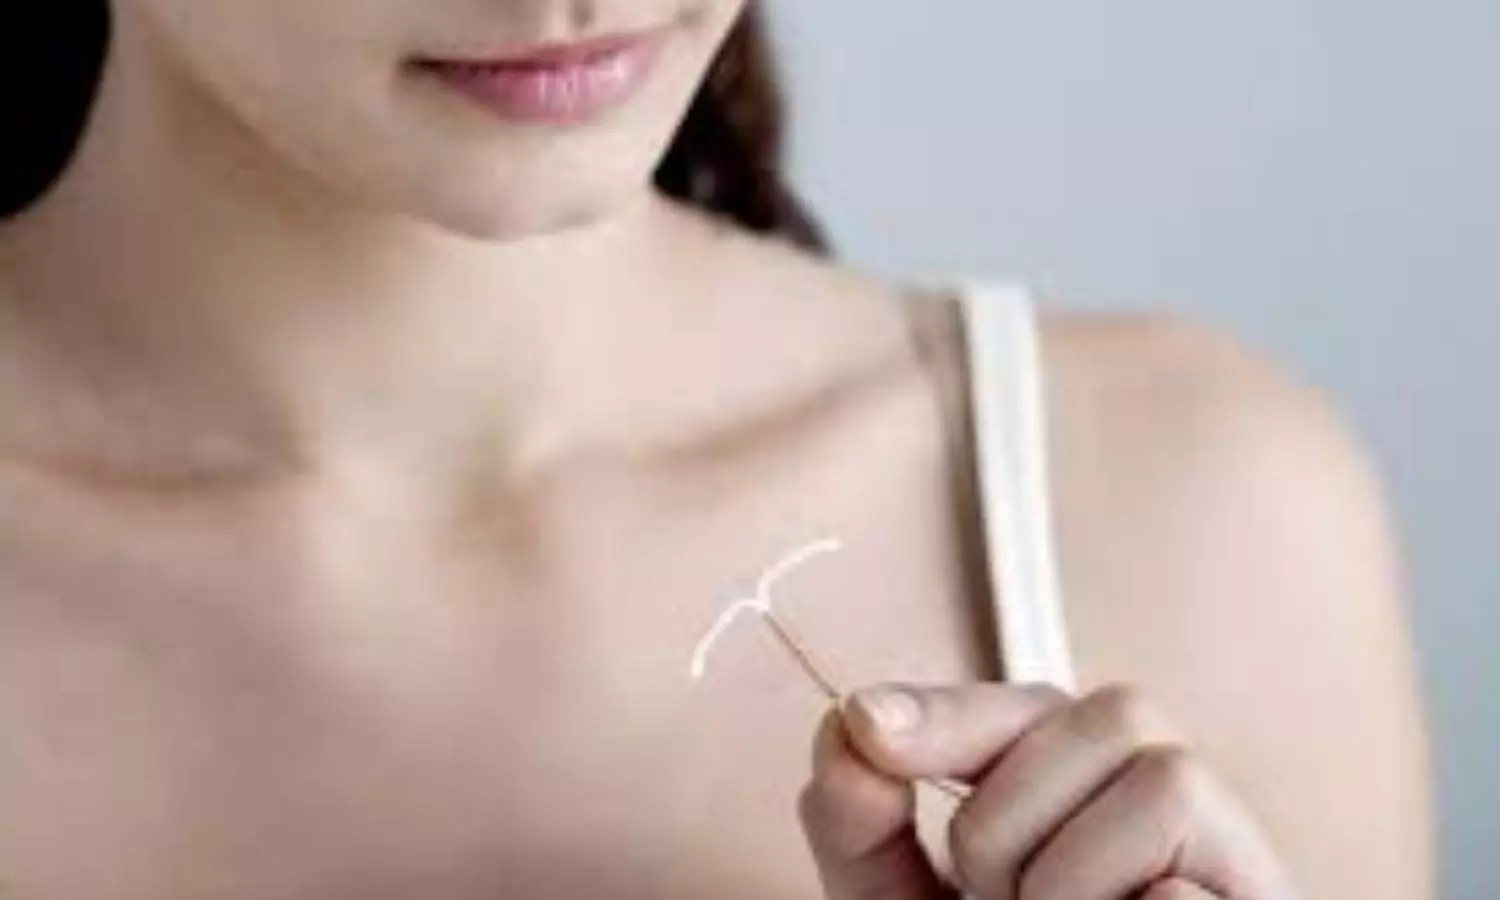 Expulsion rates of levonorgestrel IUD same among women with heavy menstrual flow versus contraception users: Study